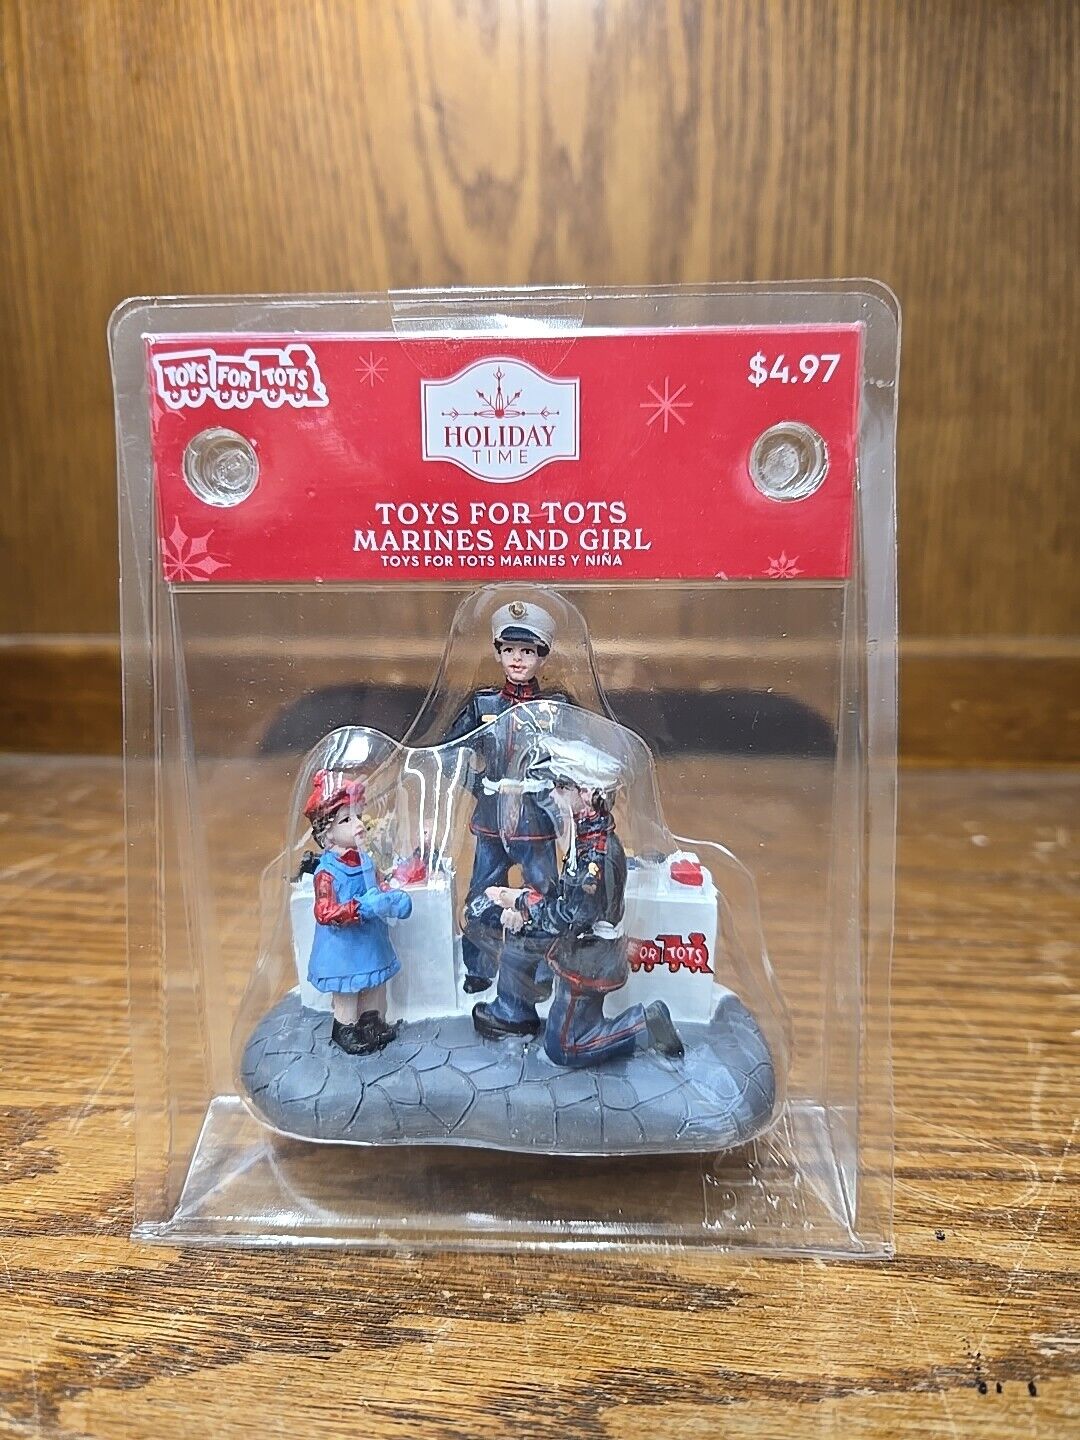 TOYS FOR TOTS MARINES & GIRL FIGURINE CHRISTMAS VILLAGE 2022 Holiday Time New